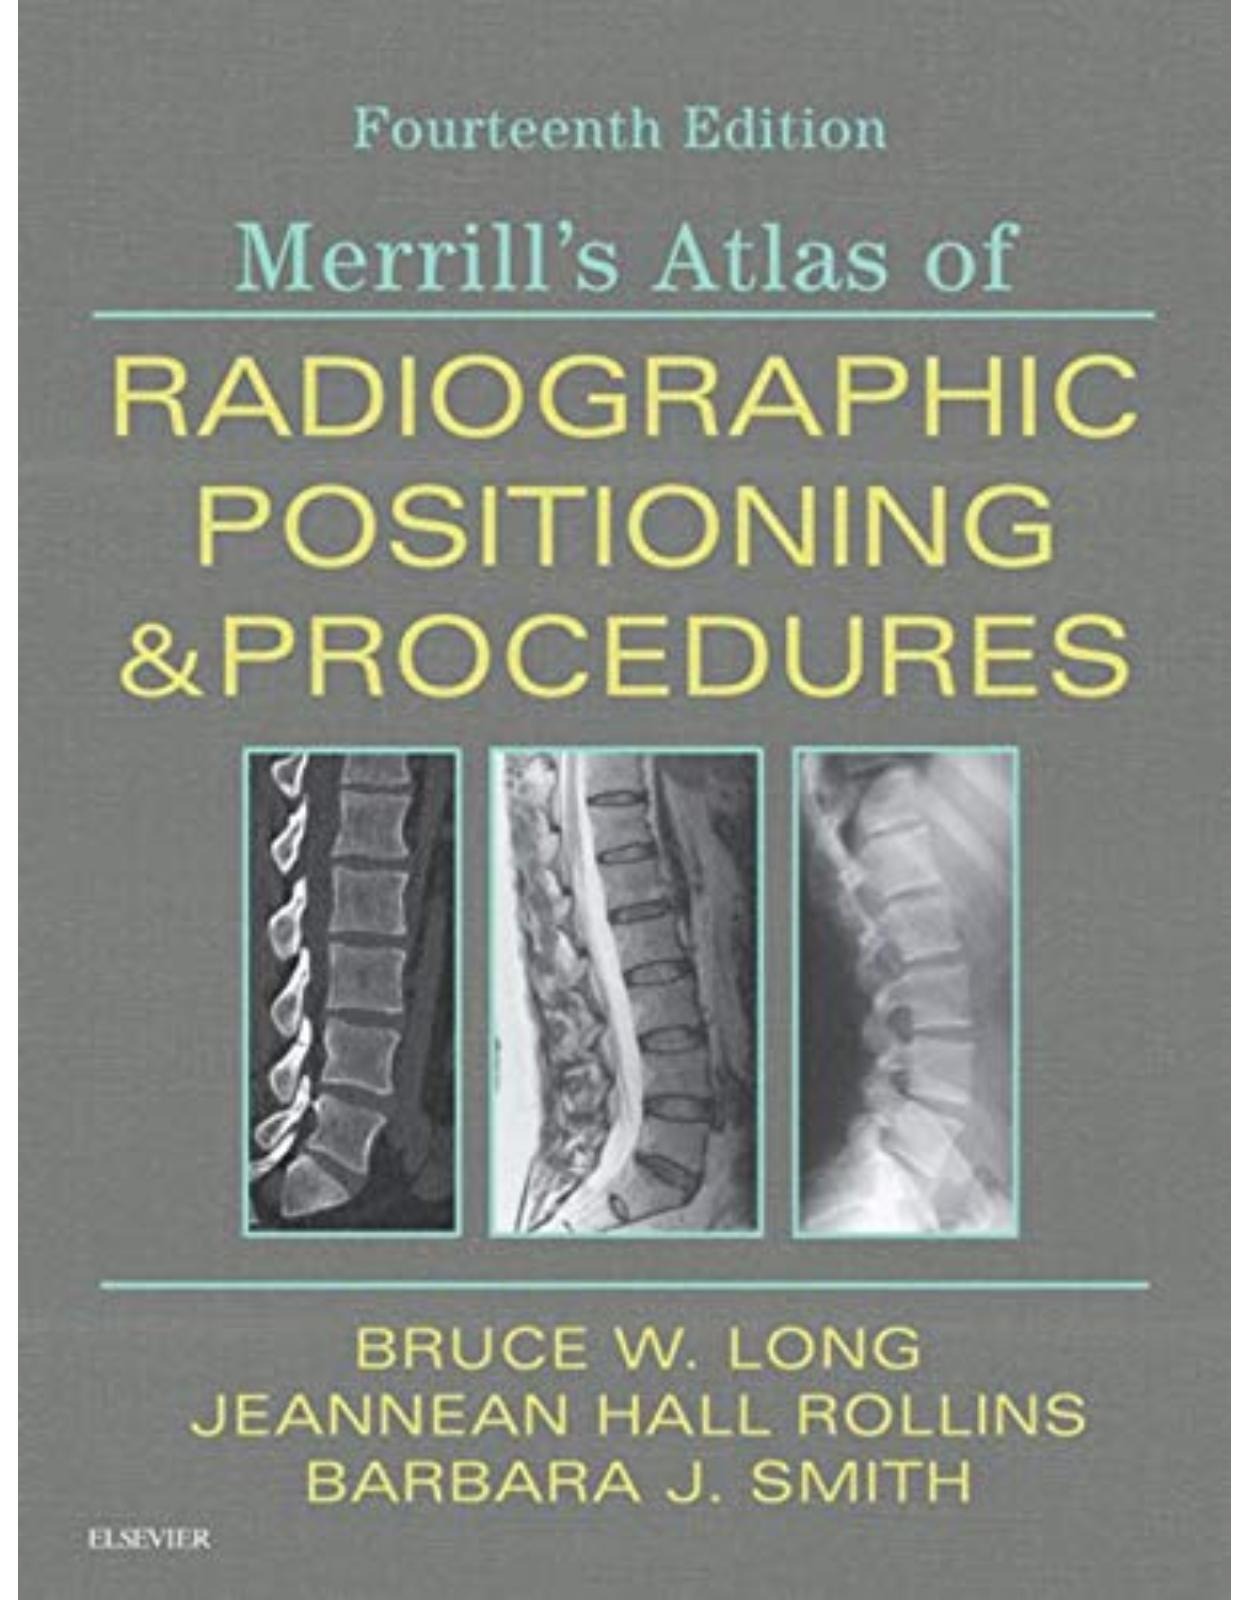 Merrill's Atlas of Radiographic Positioning and Procedures: 3-Volume Set, 14e